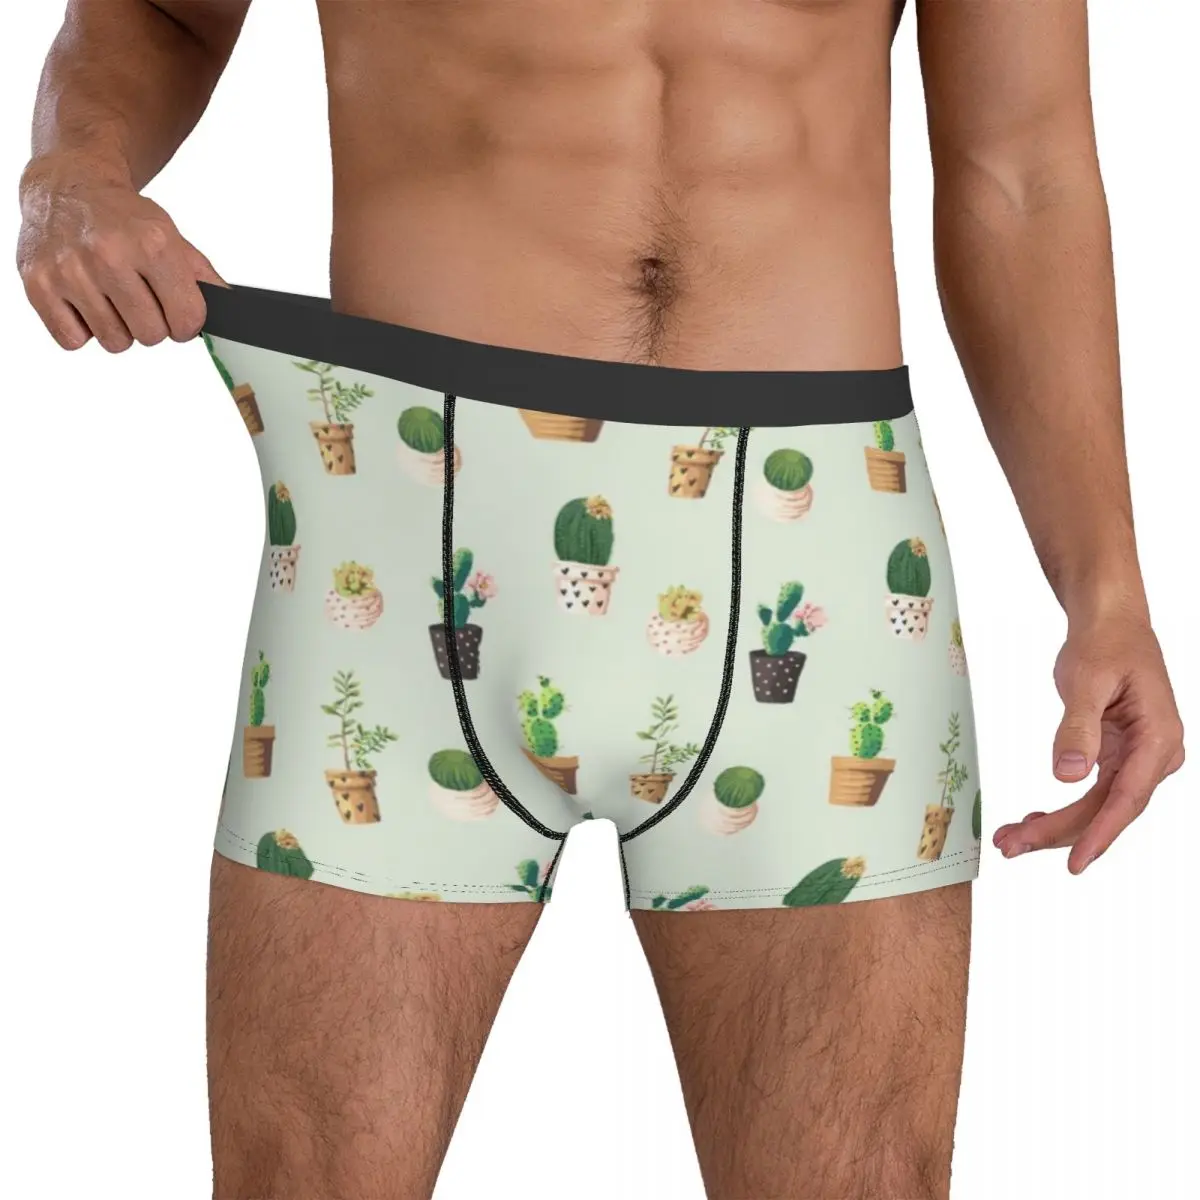 

Cactus Printed Underwear pattern unique variety Pouch High Quality Boxer Shorts Print Boxer Brief Cute Male Panties Plus Size